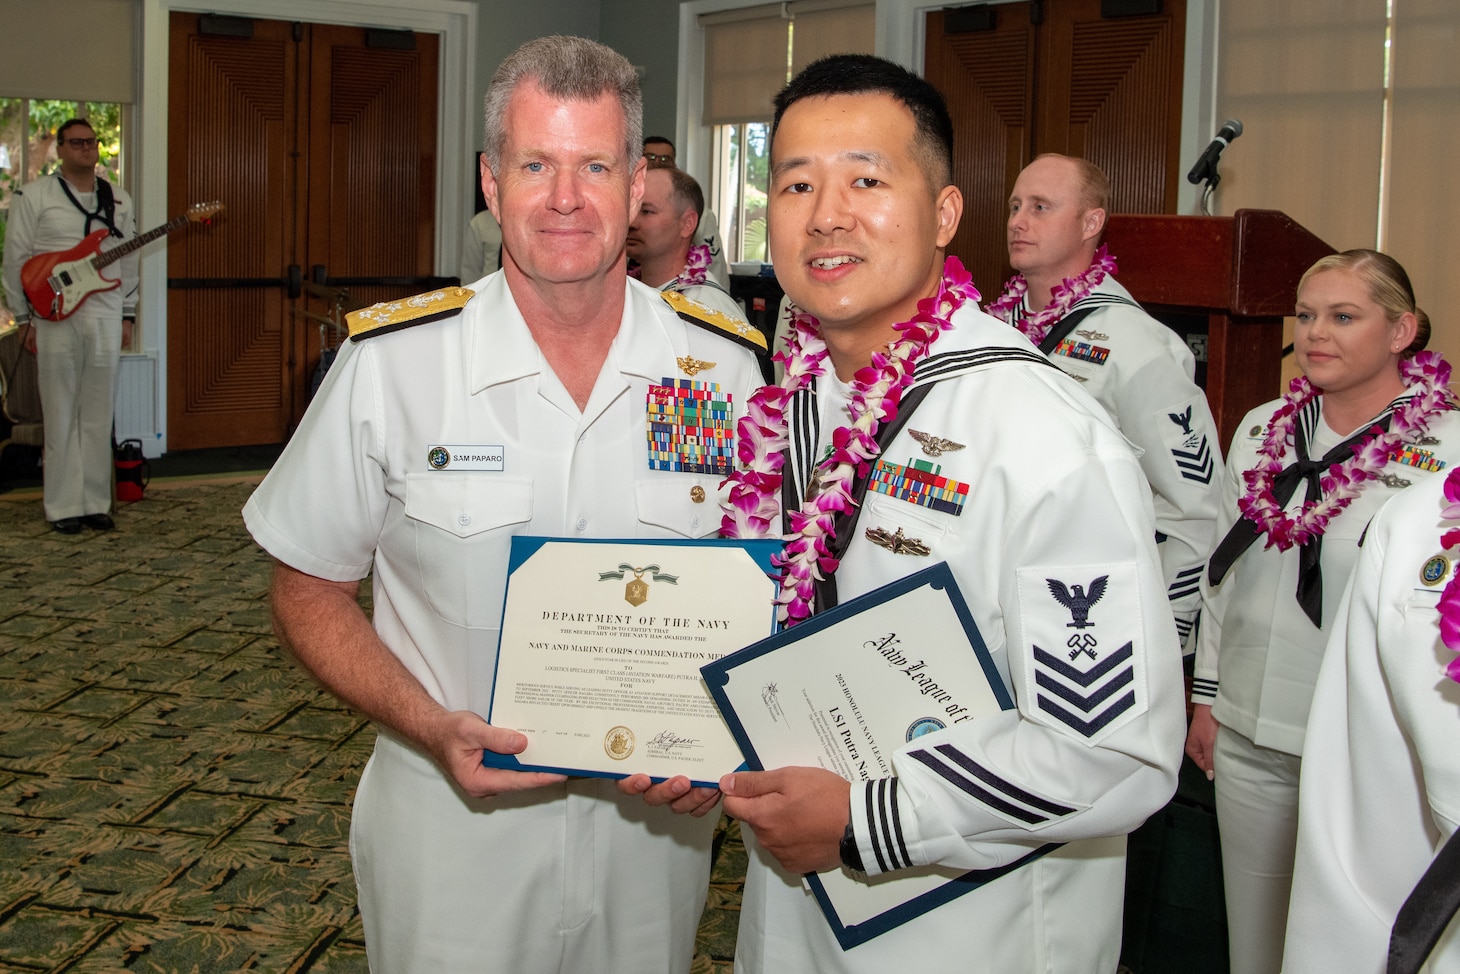 Adm. Samuel Paparo, commander of U.S. Pacific Fleet, poses for a photo with the Shore Sailor of the Year, Logistics Specialist 1st Class Putra Nagara. The SOY program, established in 1972, recognizes those who exemplify a warfighting spirit, the Navy’s core values, and a deep commitment to their commands and communities. (U.S. Navy photo by Mass Communication Specialist 1st Class Nick Bauer)